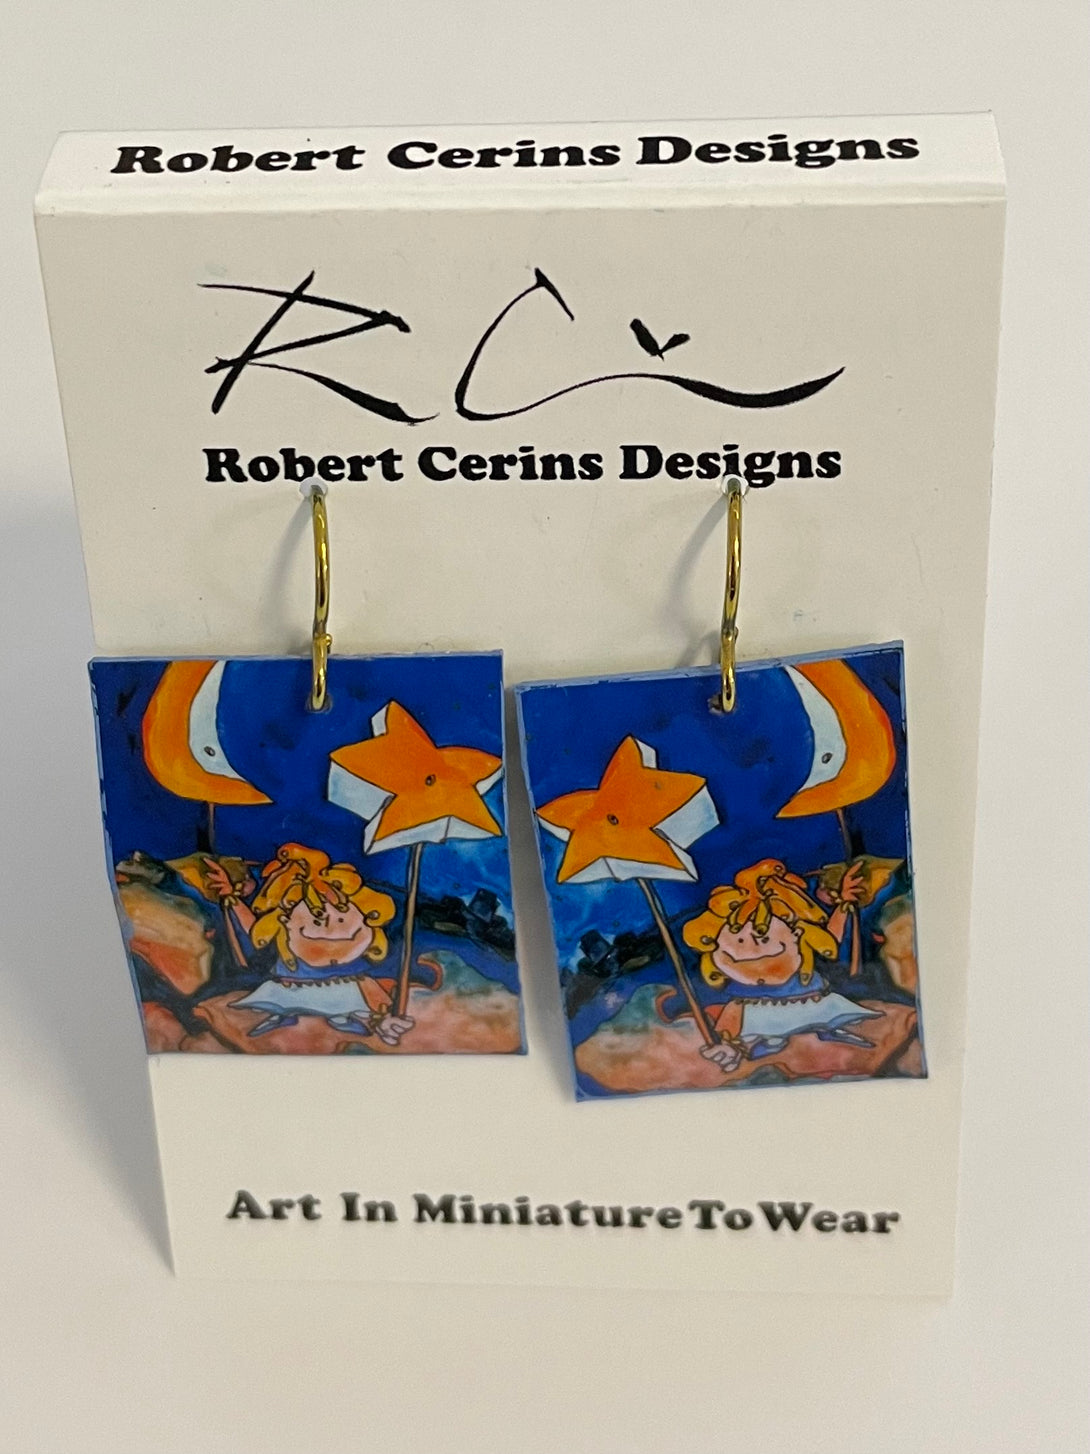 Robert Cerins - Earrings - Moon & Star - Square - Robert Cerins - McMillan Arts Centre Gallery, Gift Shop and Box Office - Vancouver Island Art Gallery